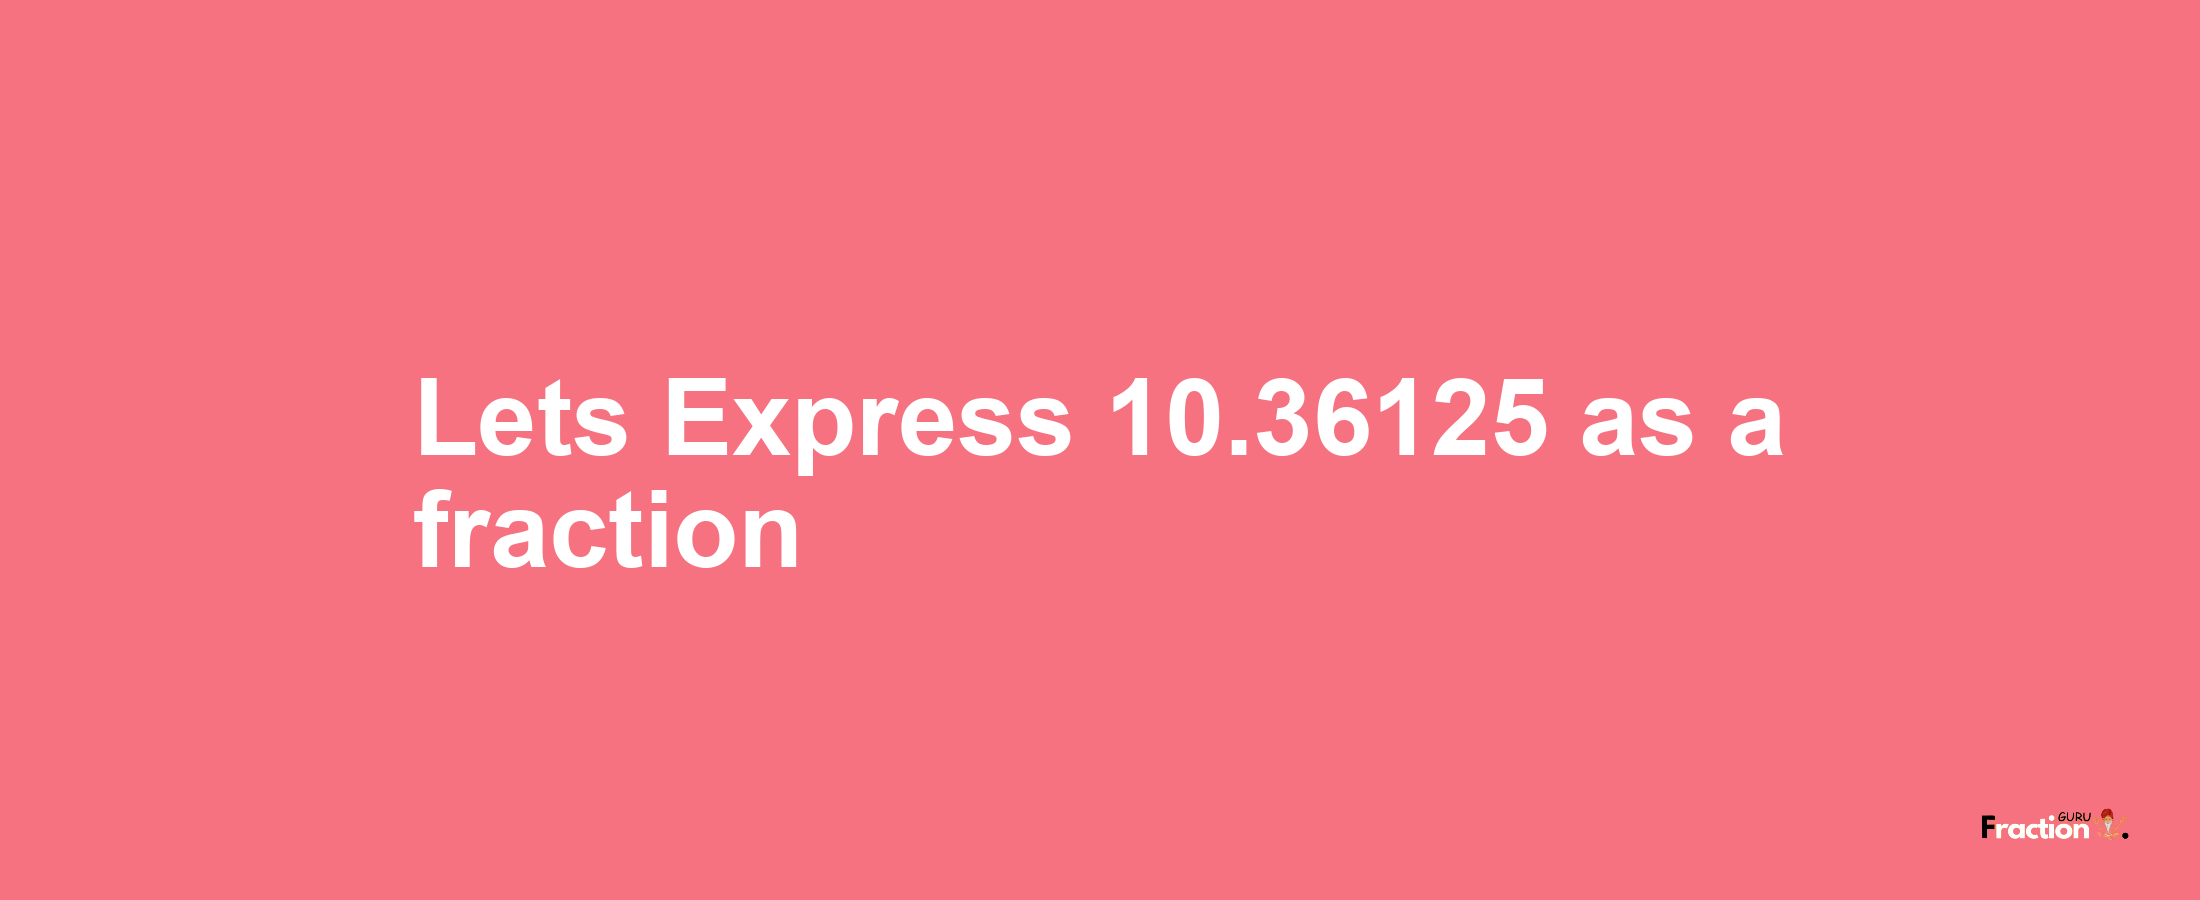 Lets Express 10.36125 as afraction